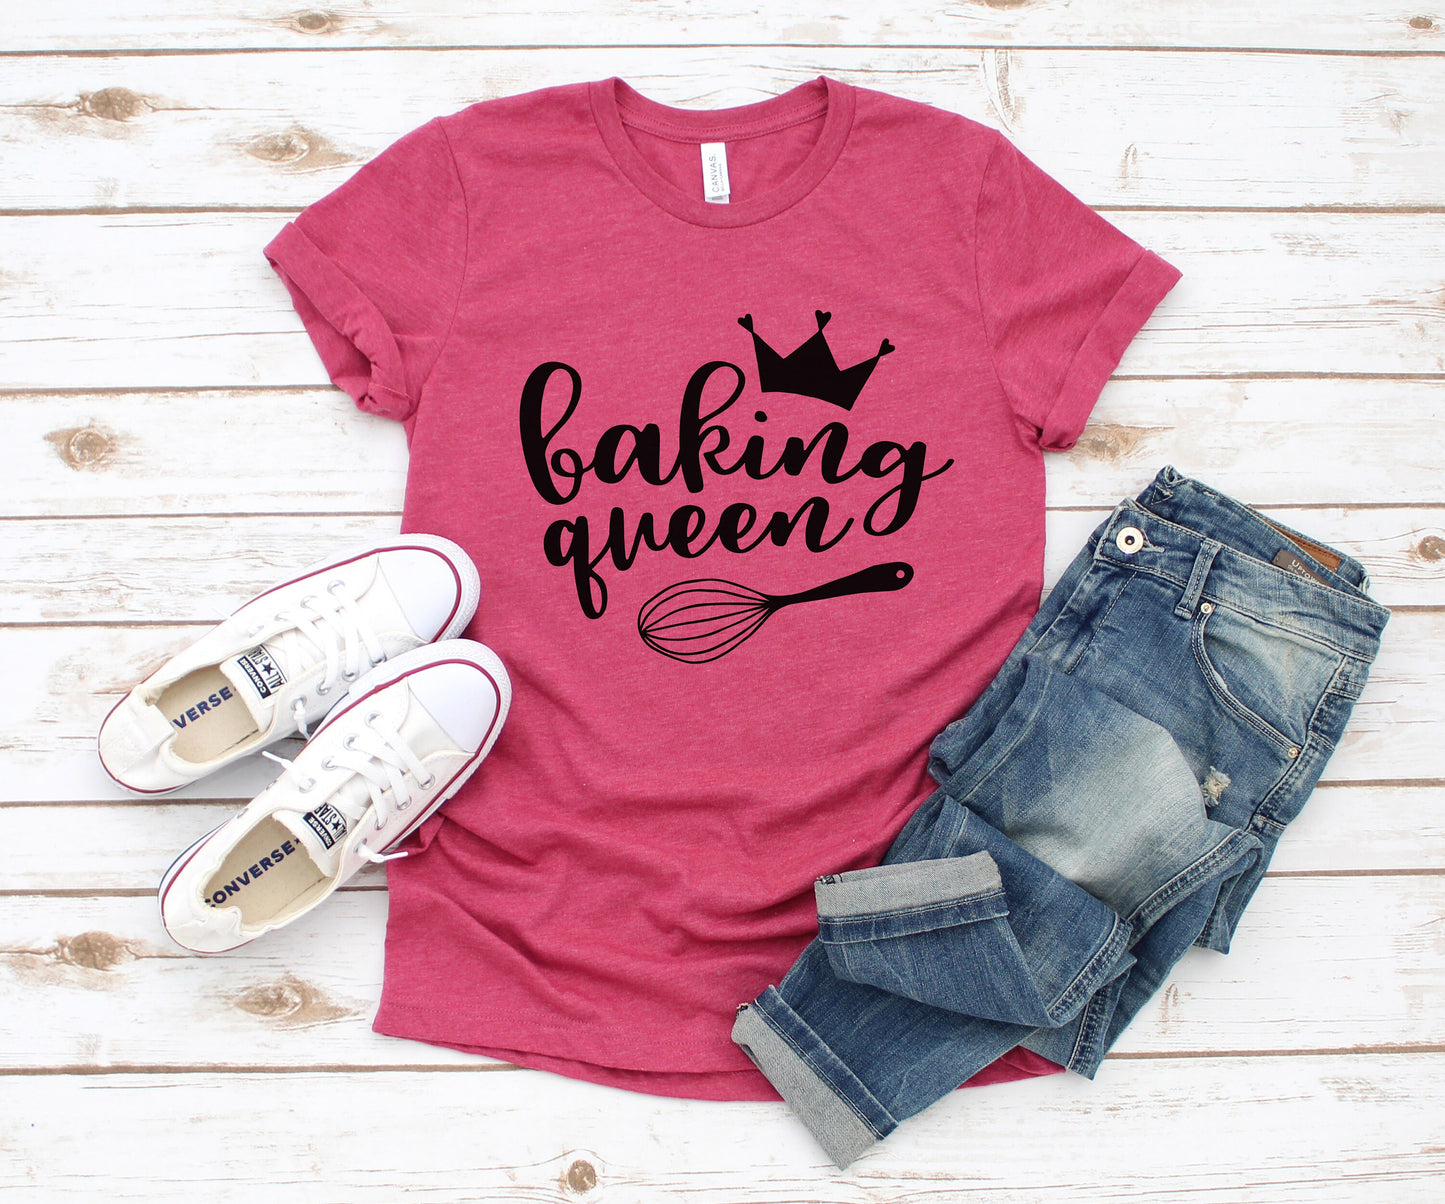 Baking Queen Cooking and Baking Ultra Soft Graphic Tee Unisex Soft Tee T-shirt for Women or Men